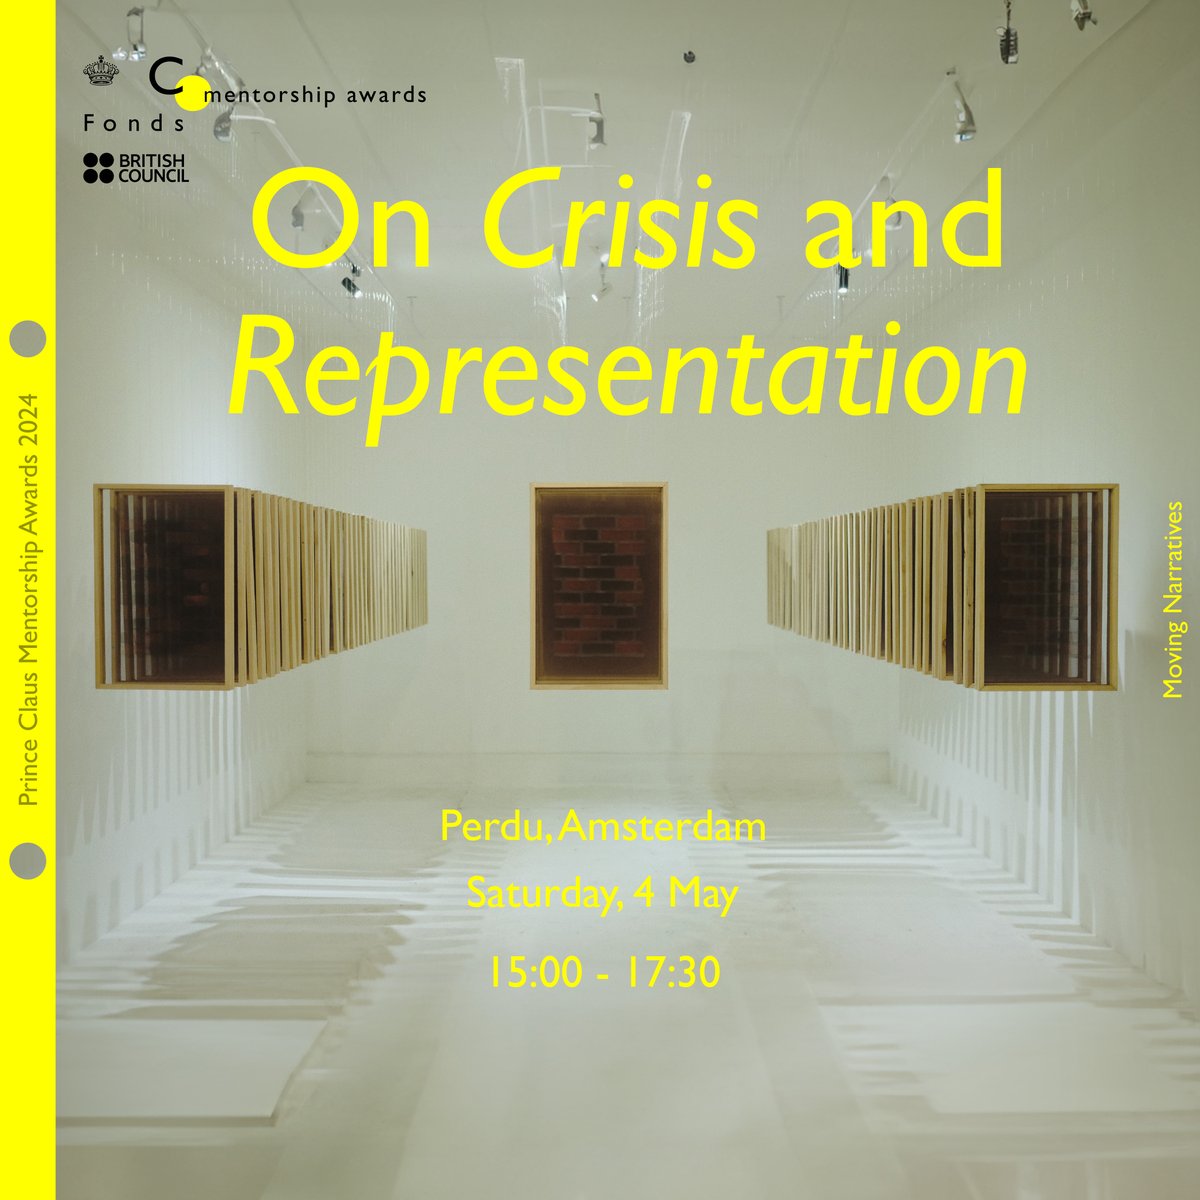 On the 4th of May from 14:30, you are invited to join the public event 'On Crisis and Representation' featuring the cohort of Cycle 1 of the Mentorship Award: Moving Narratives at Perdu in Amsterdam. The event is free of charge - please RSVP here: loom.ly/eFyhRV4